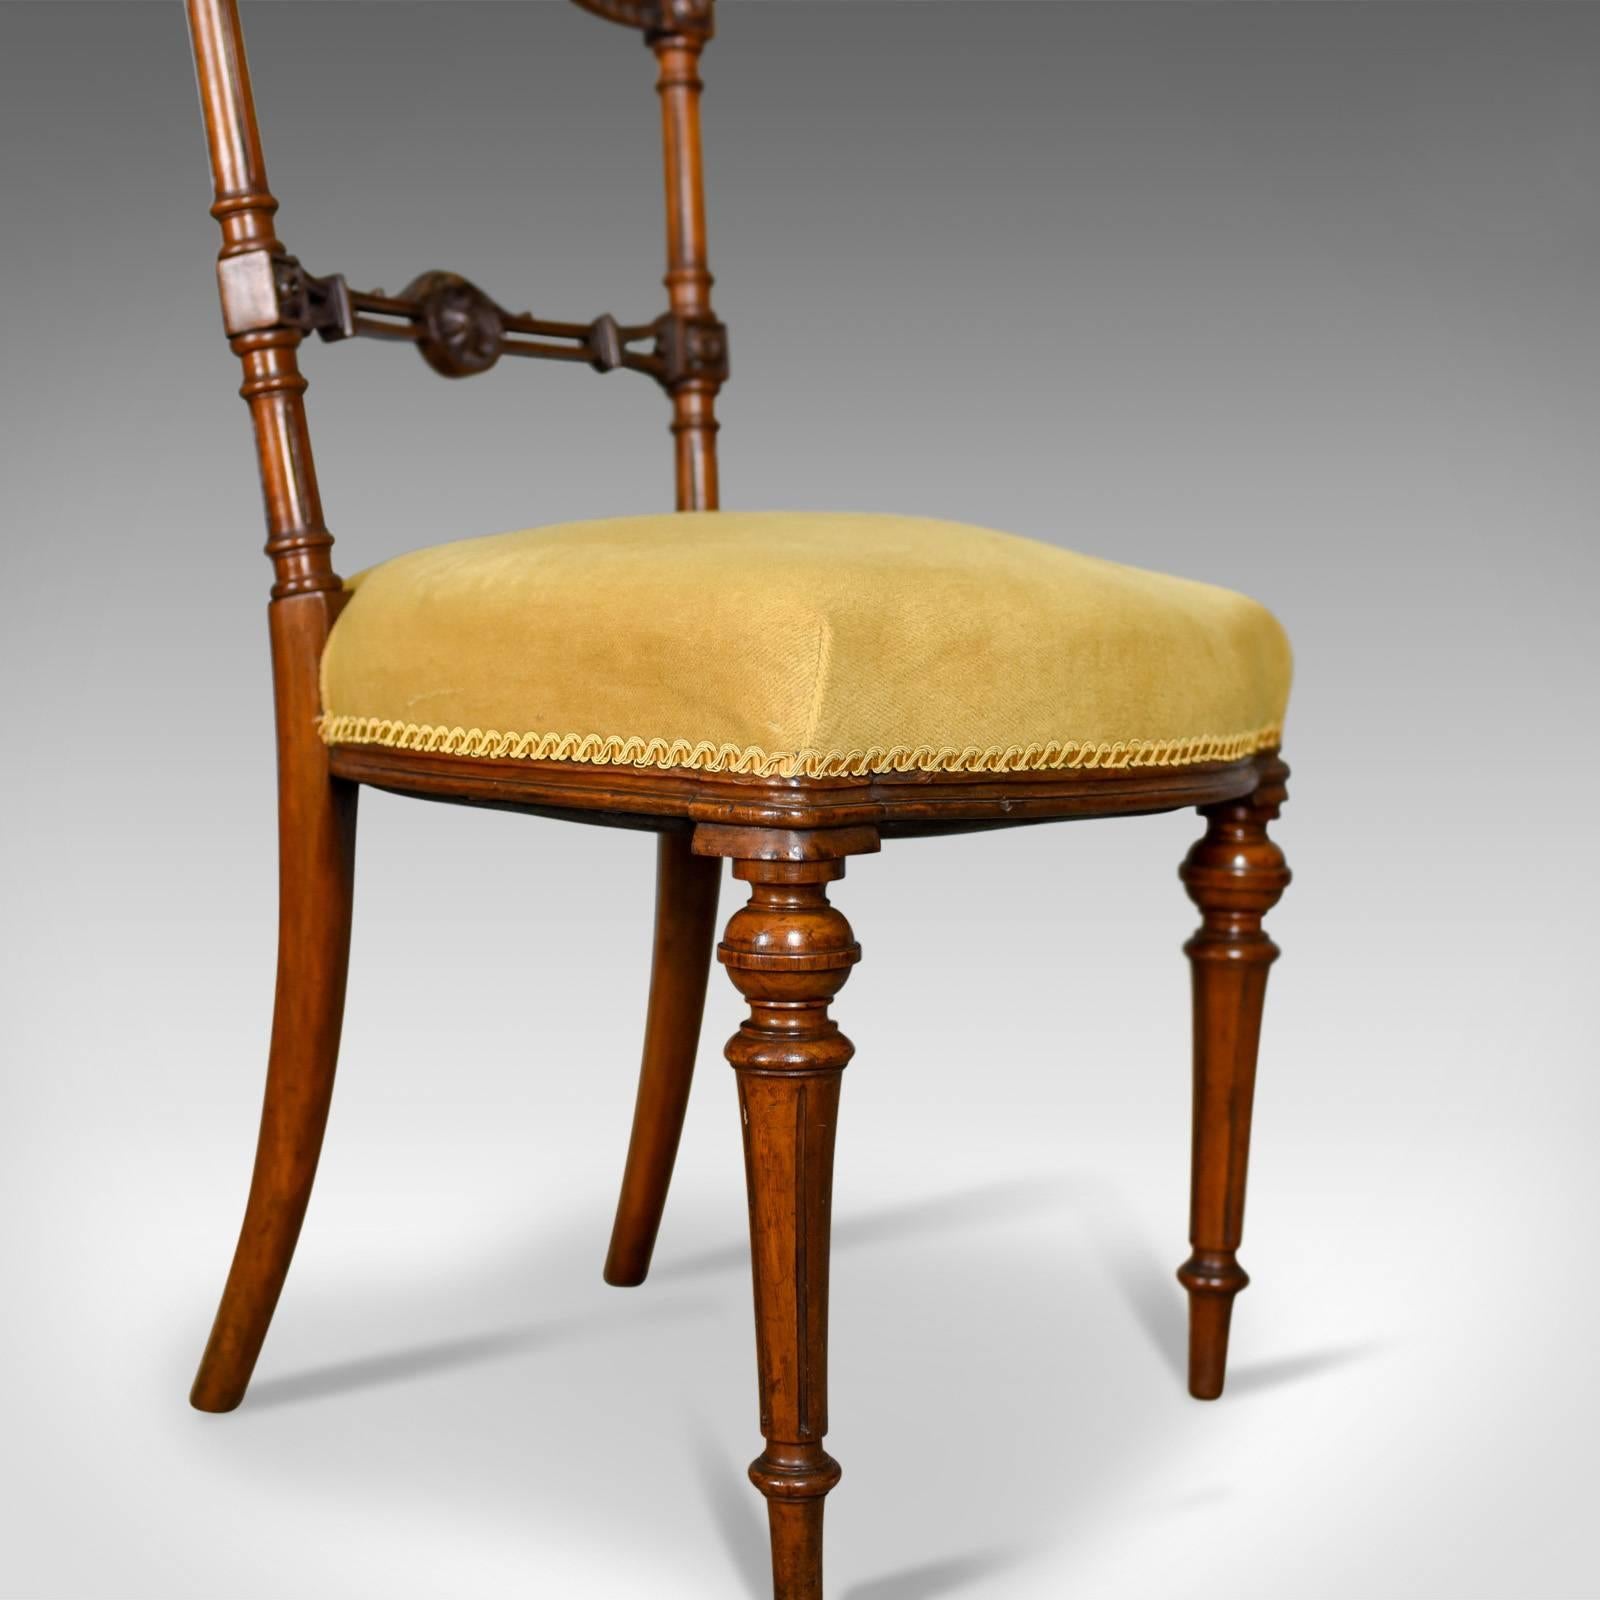 Pair of Antique Chairs, English, Walnut, Aesthetic Period, circa 1880 5